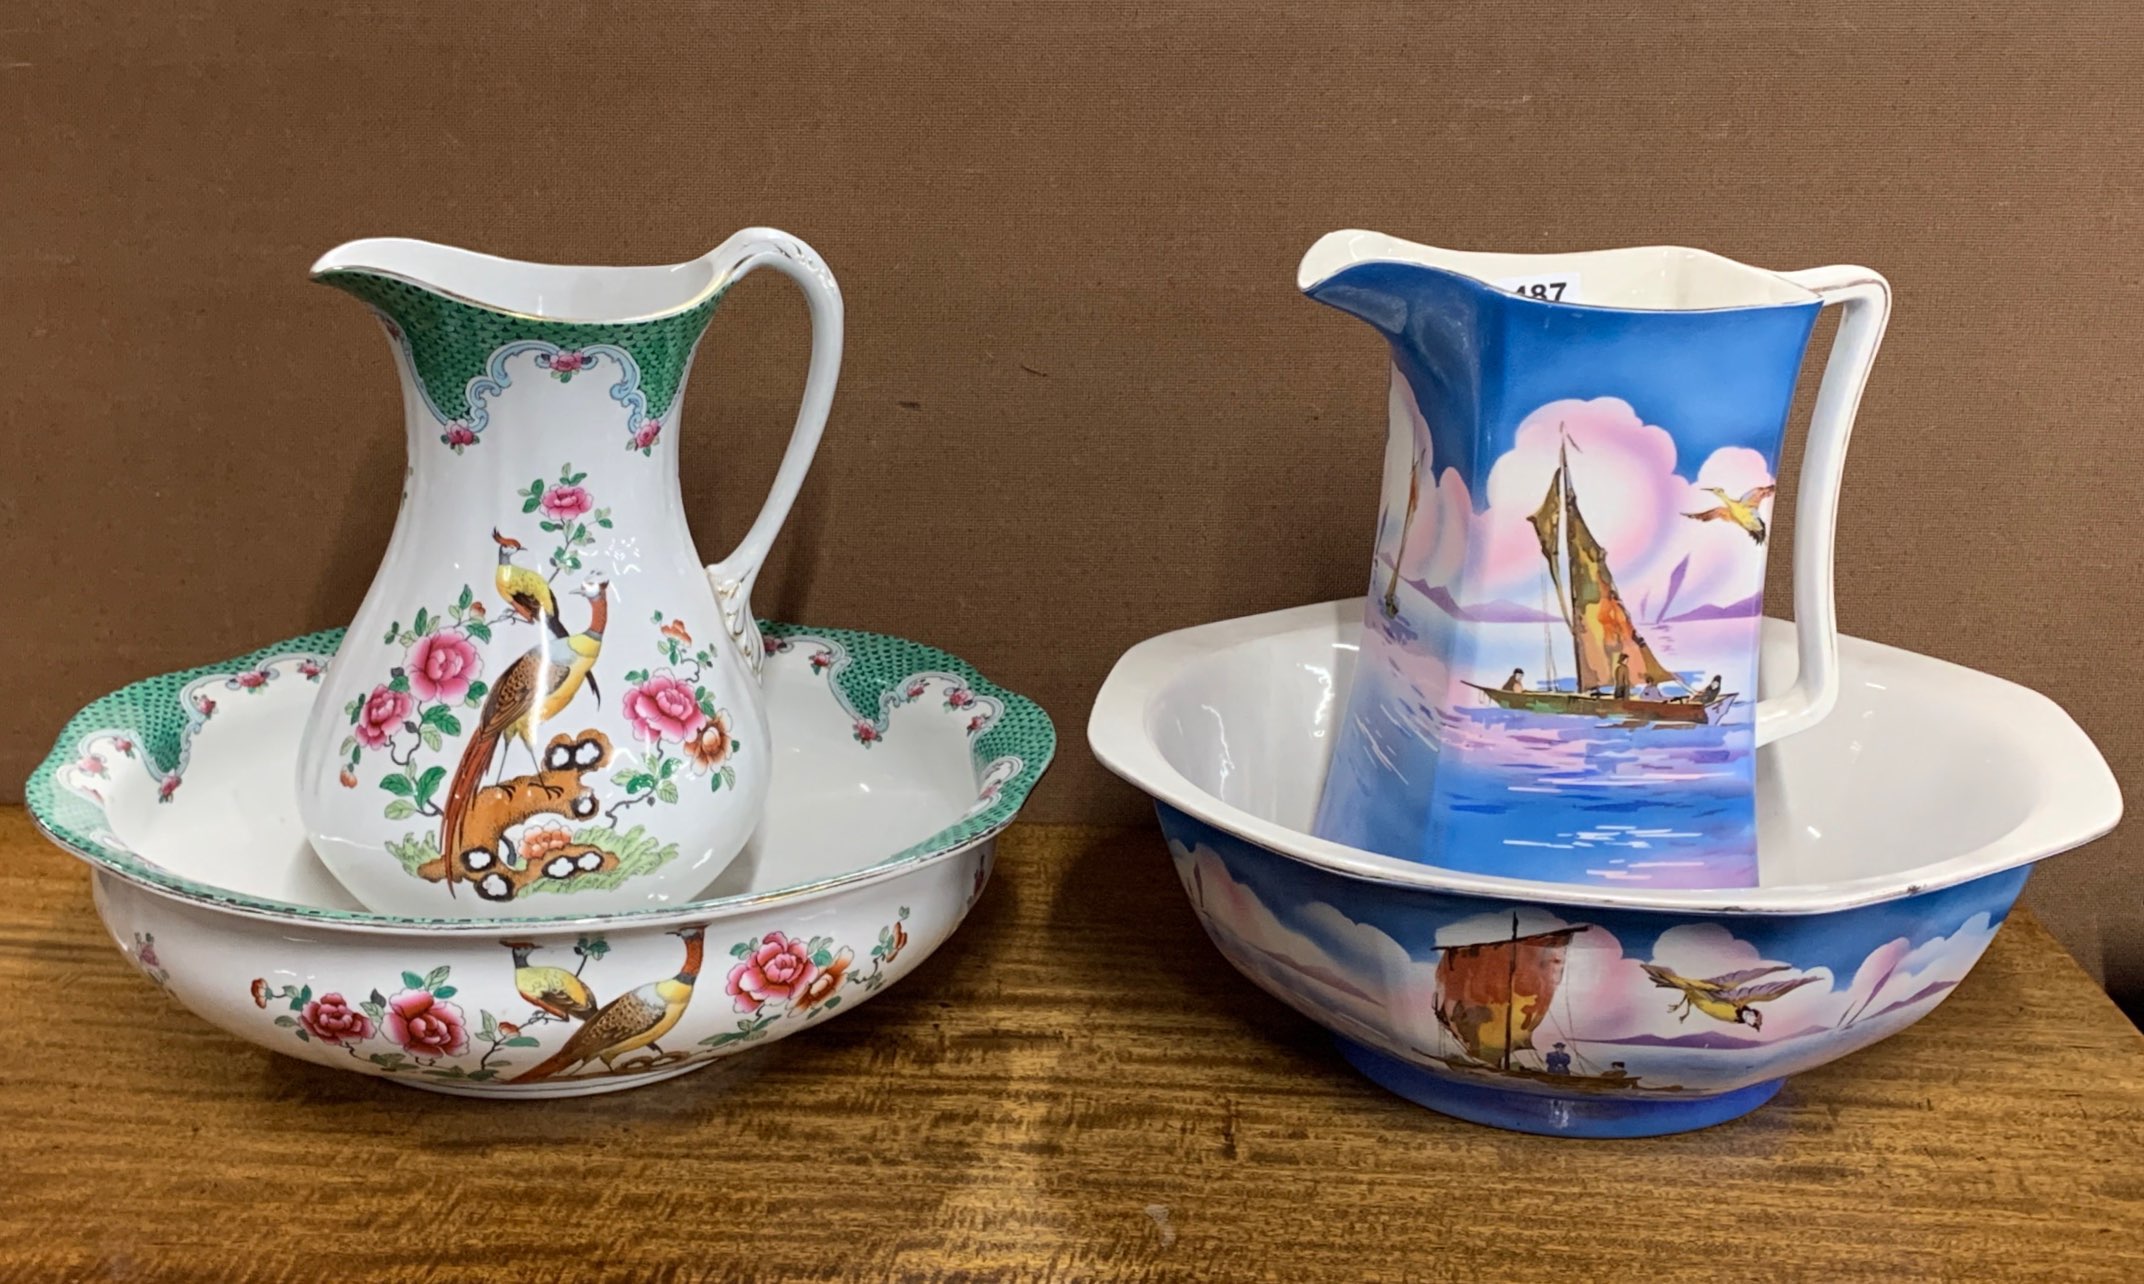 Two early 20th century jug and bowl sets.